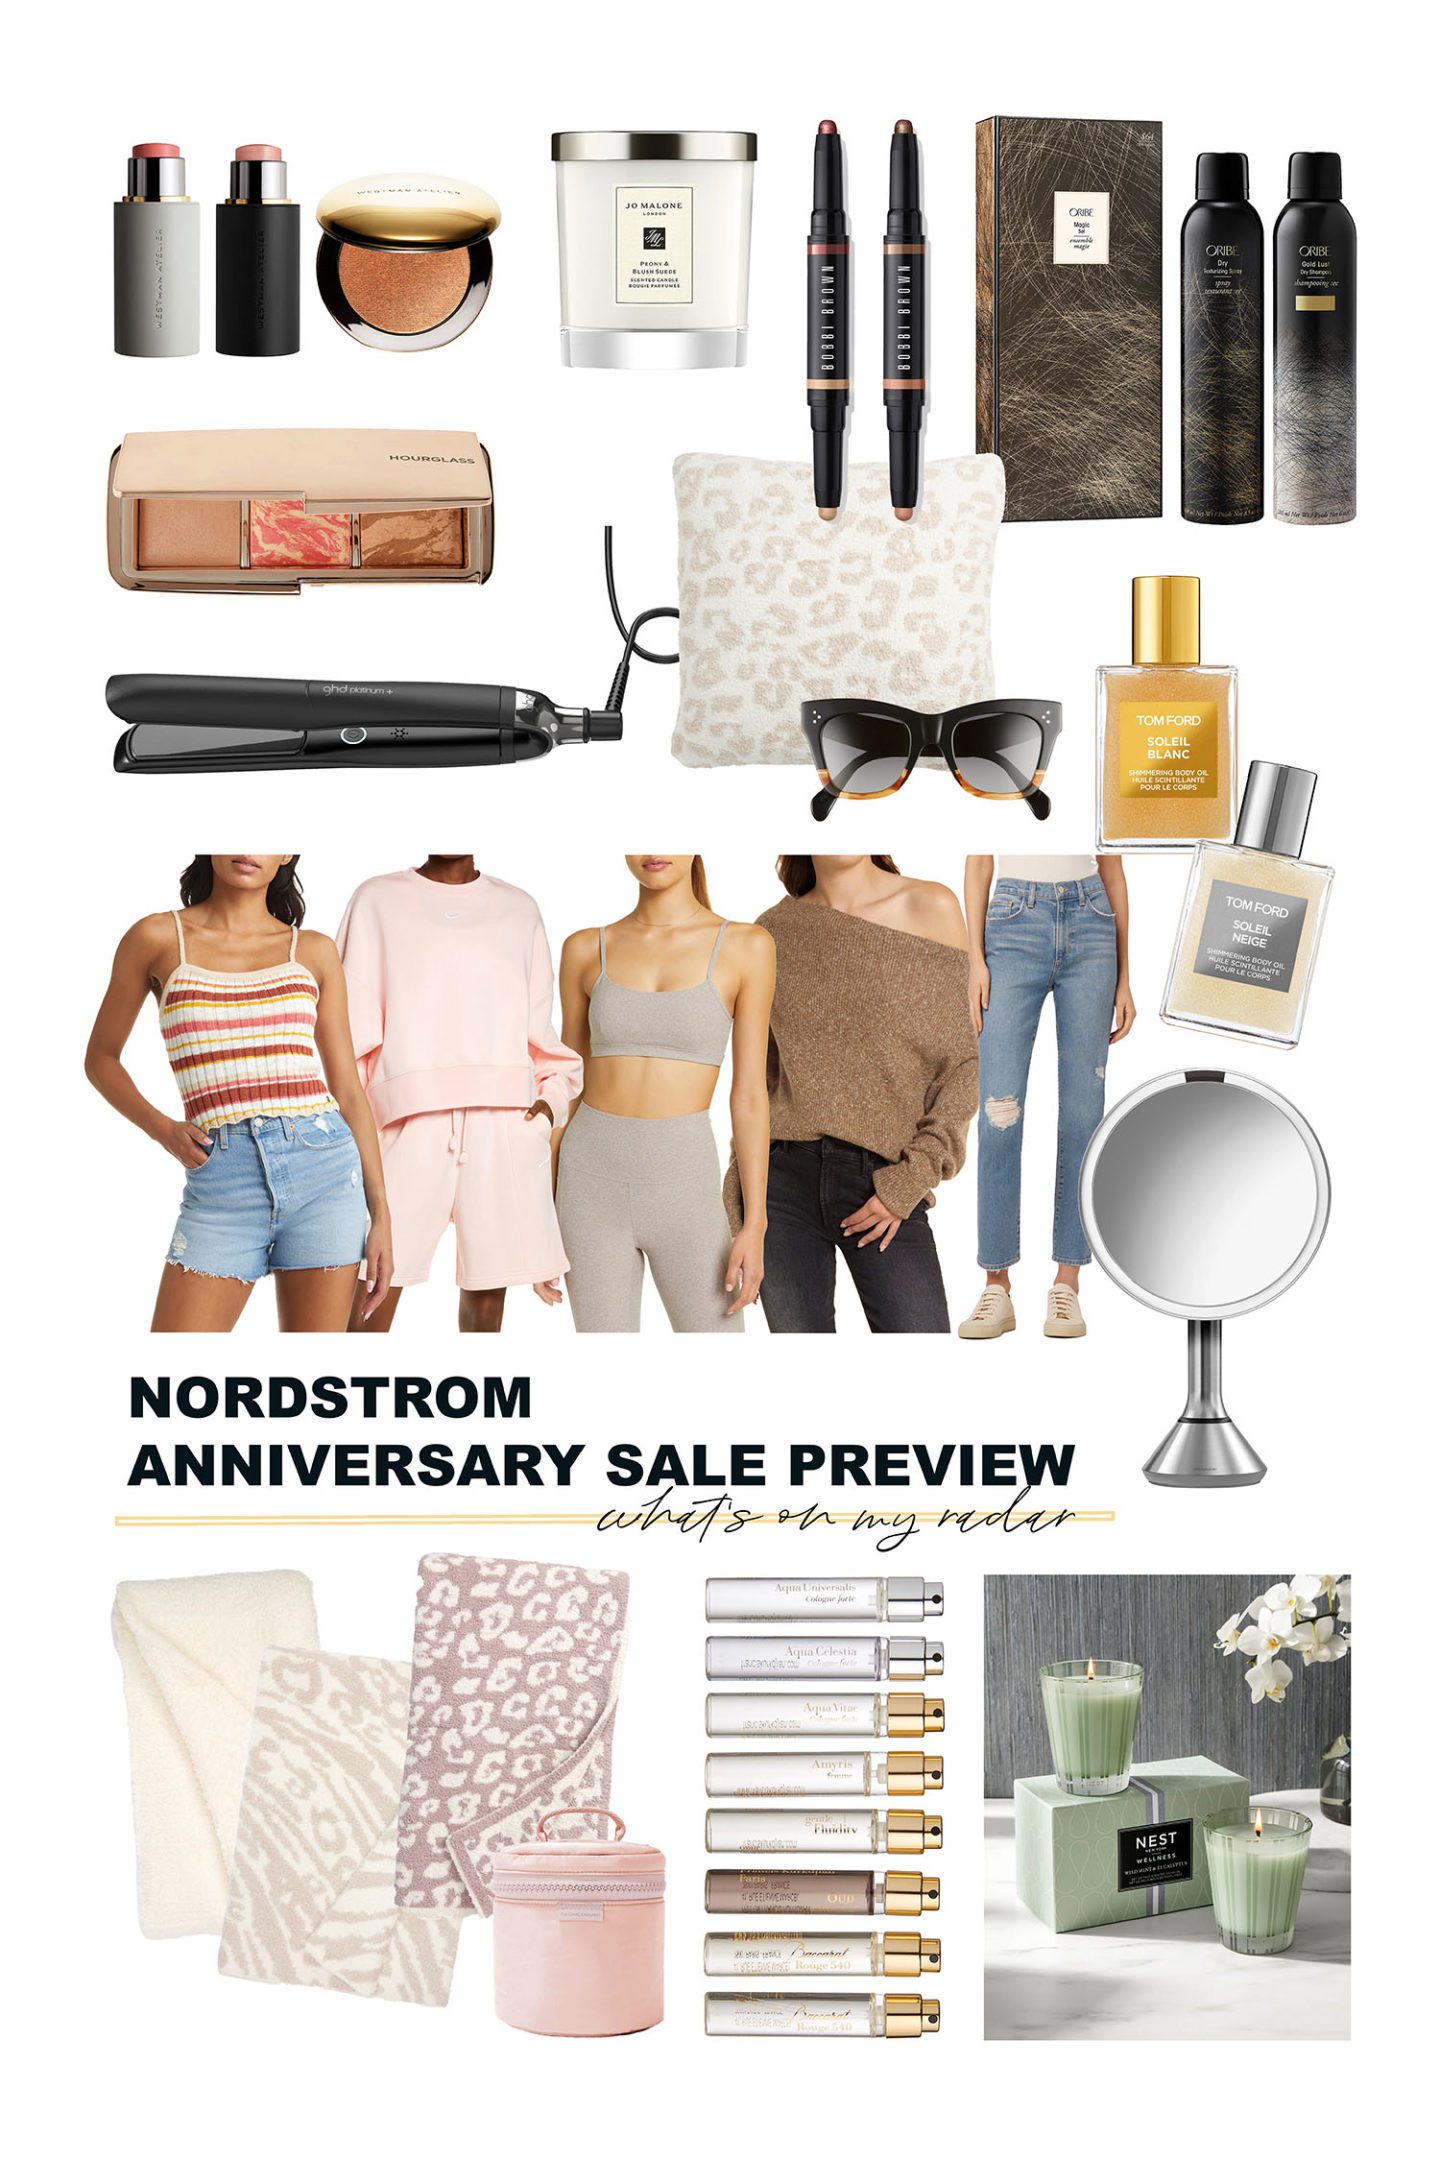 Nordstrom Anniversary Sale 2022 PREVIEW